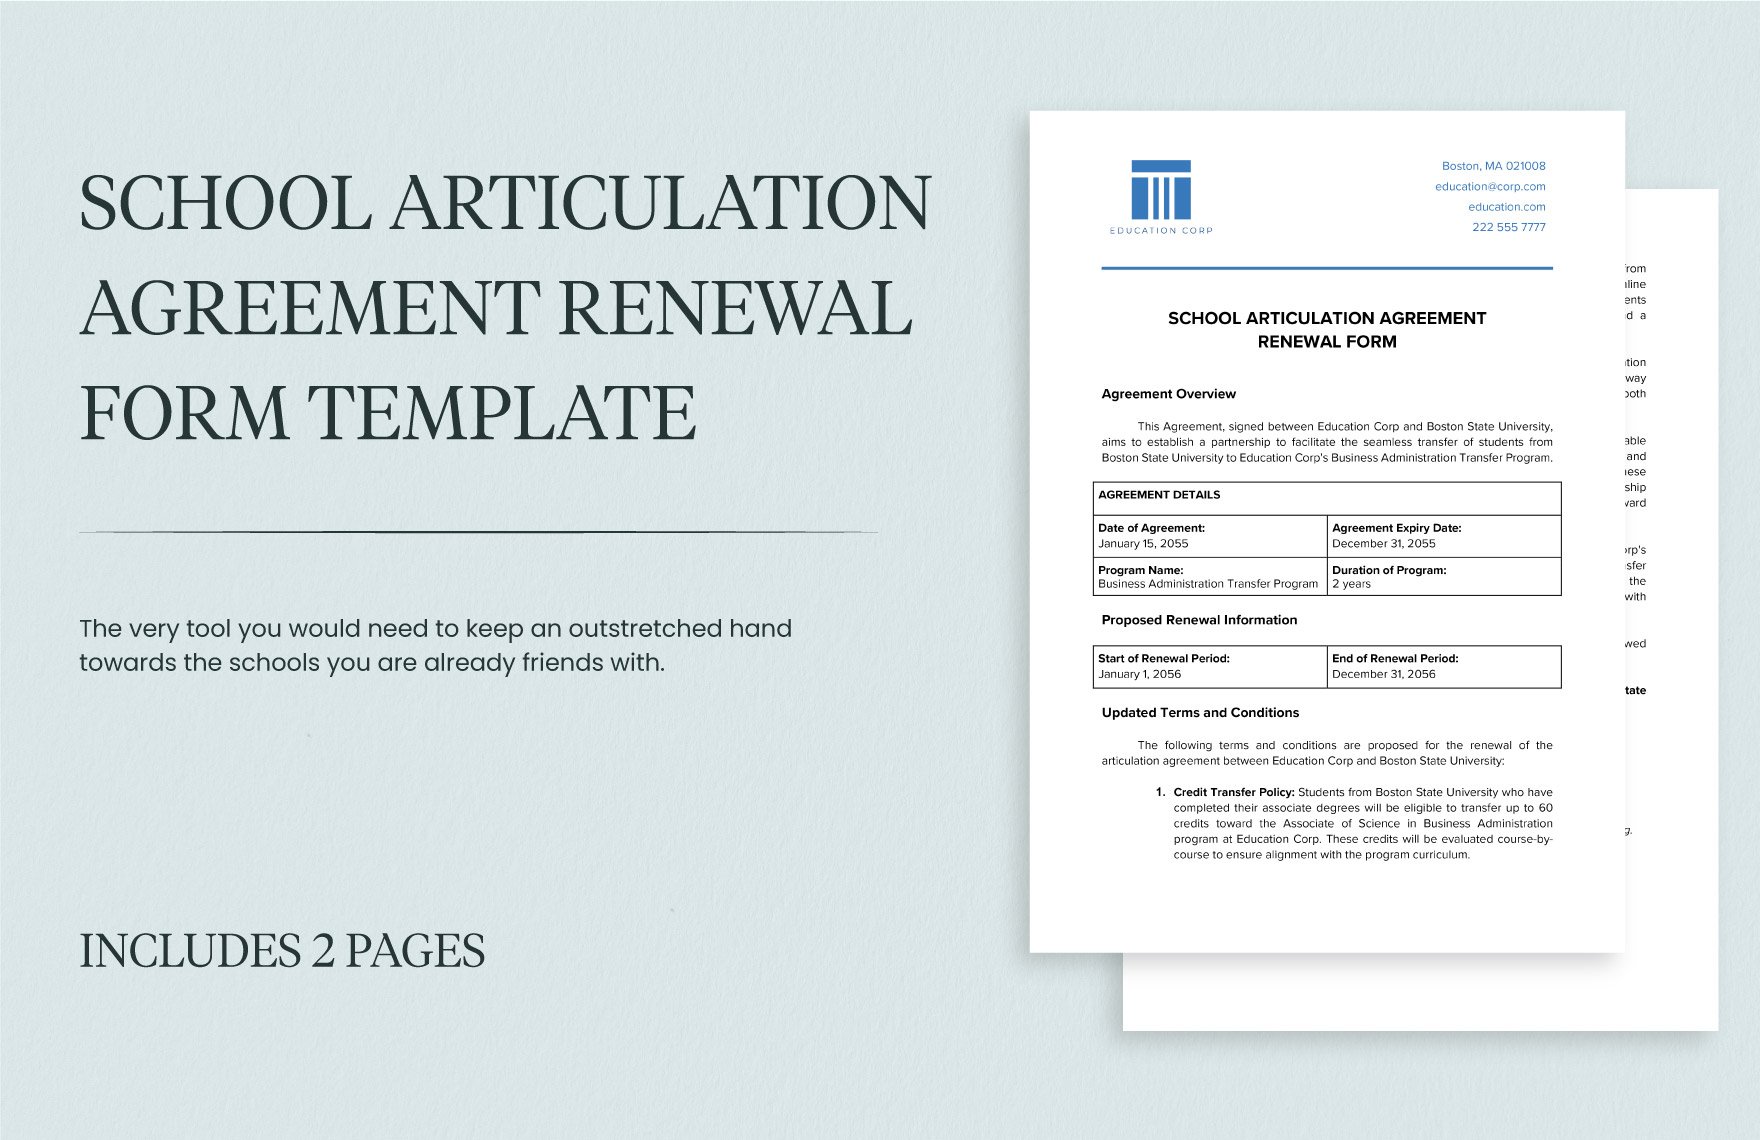 School Articulation Agreement Renewal Form Template in Word, Google Docs, PDF